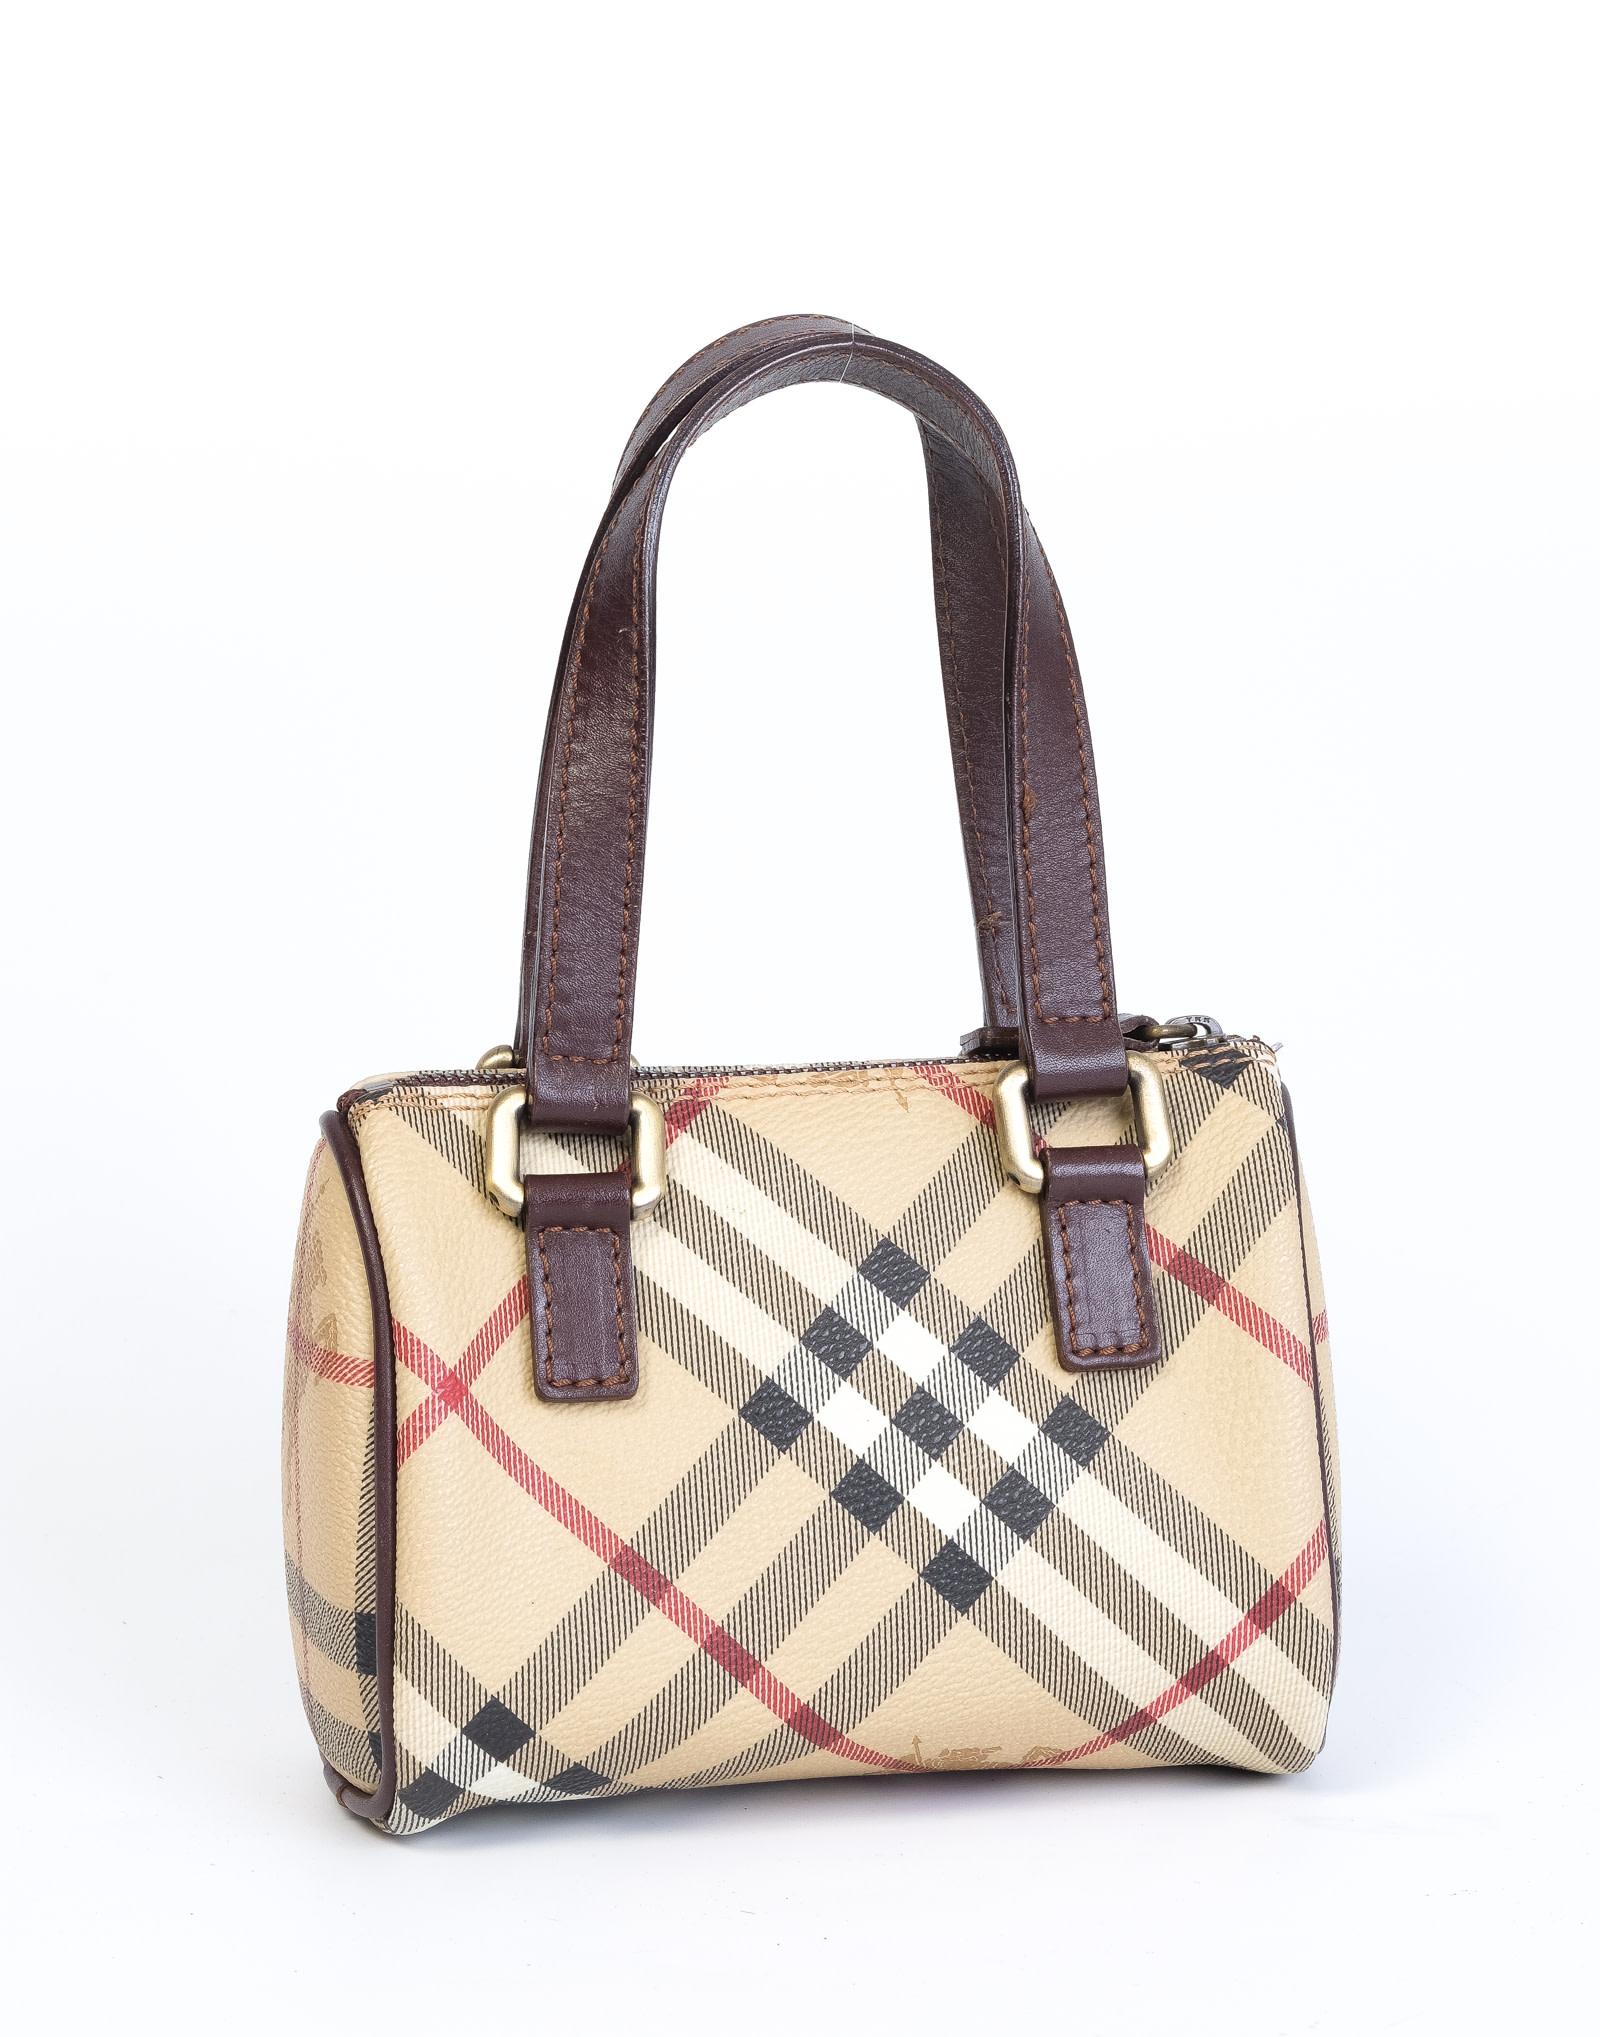 Mini Boston bag made with coated canvas with Burberry Check print and leather finishes. The bag features dual flat leather top handles, top zip closure and a brown woven fabric interior.

COLOR: Check
ITEM CODE: ITTIVGRO58CAL
MATERIAL: Coated